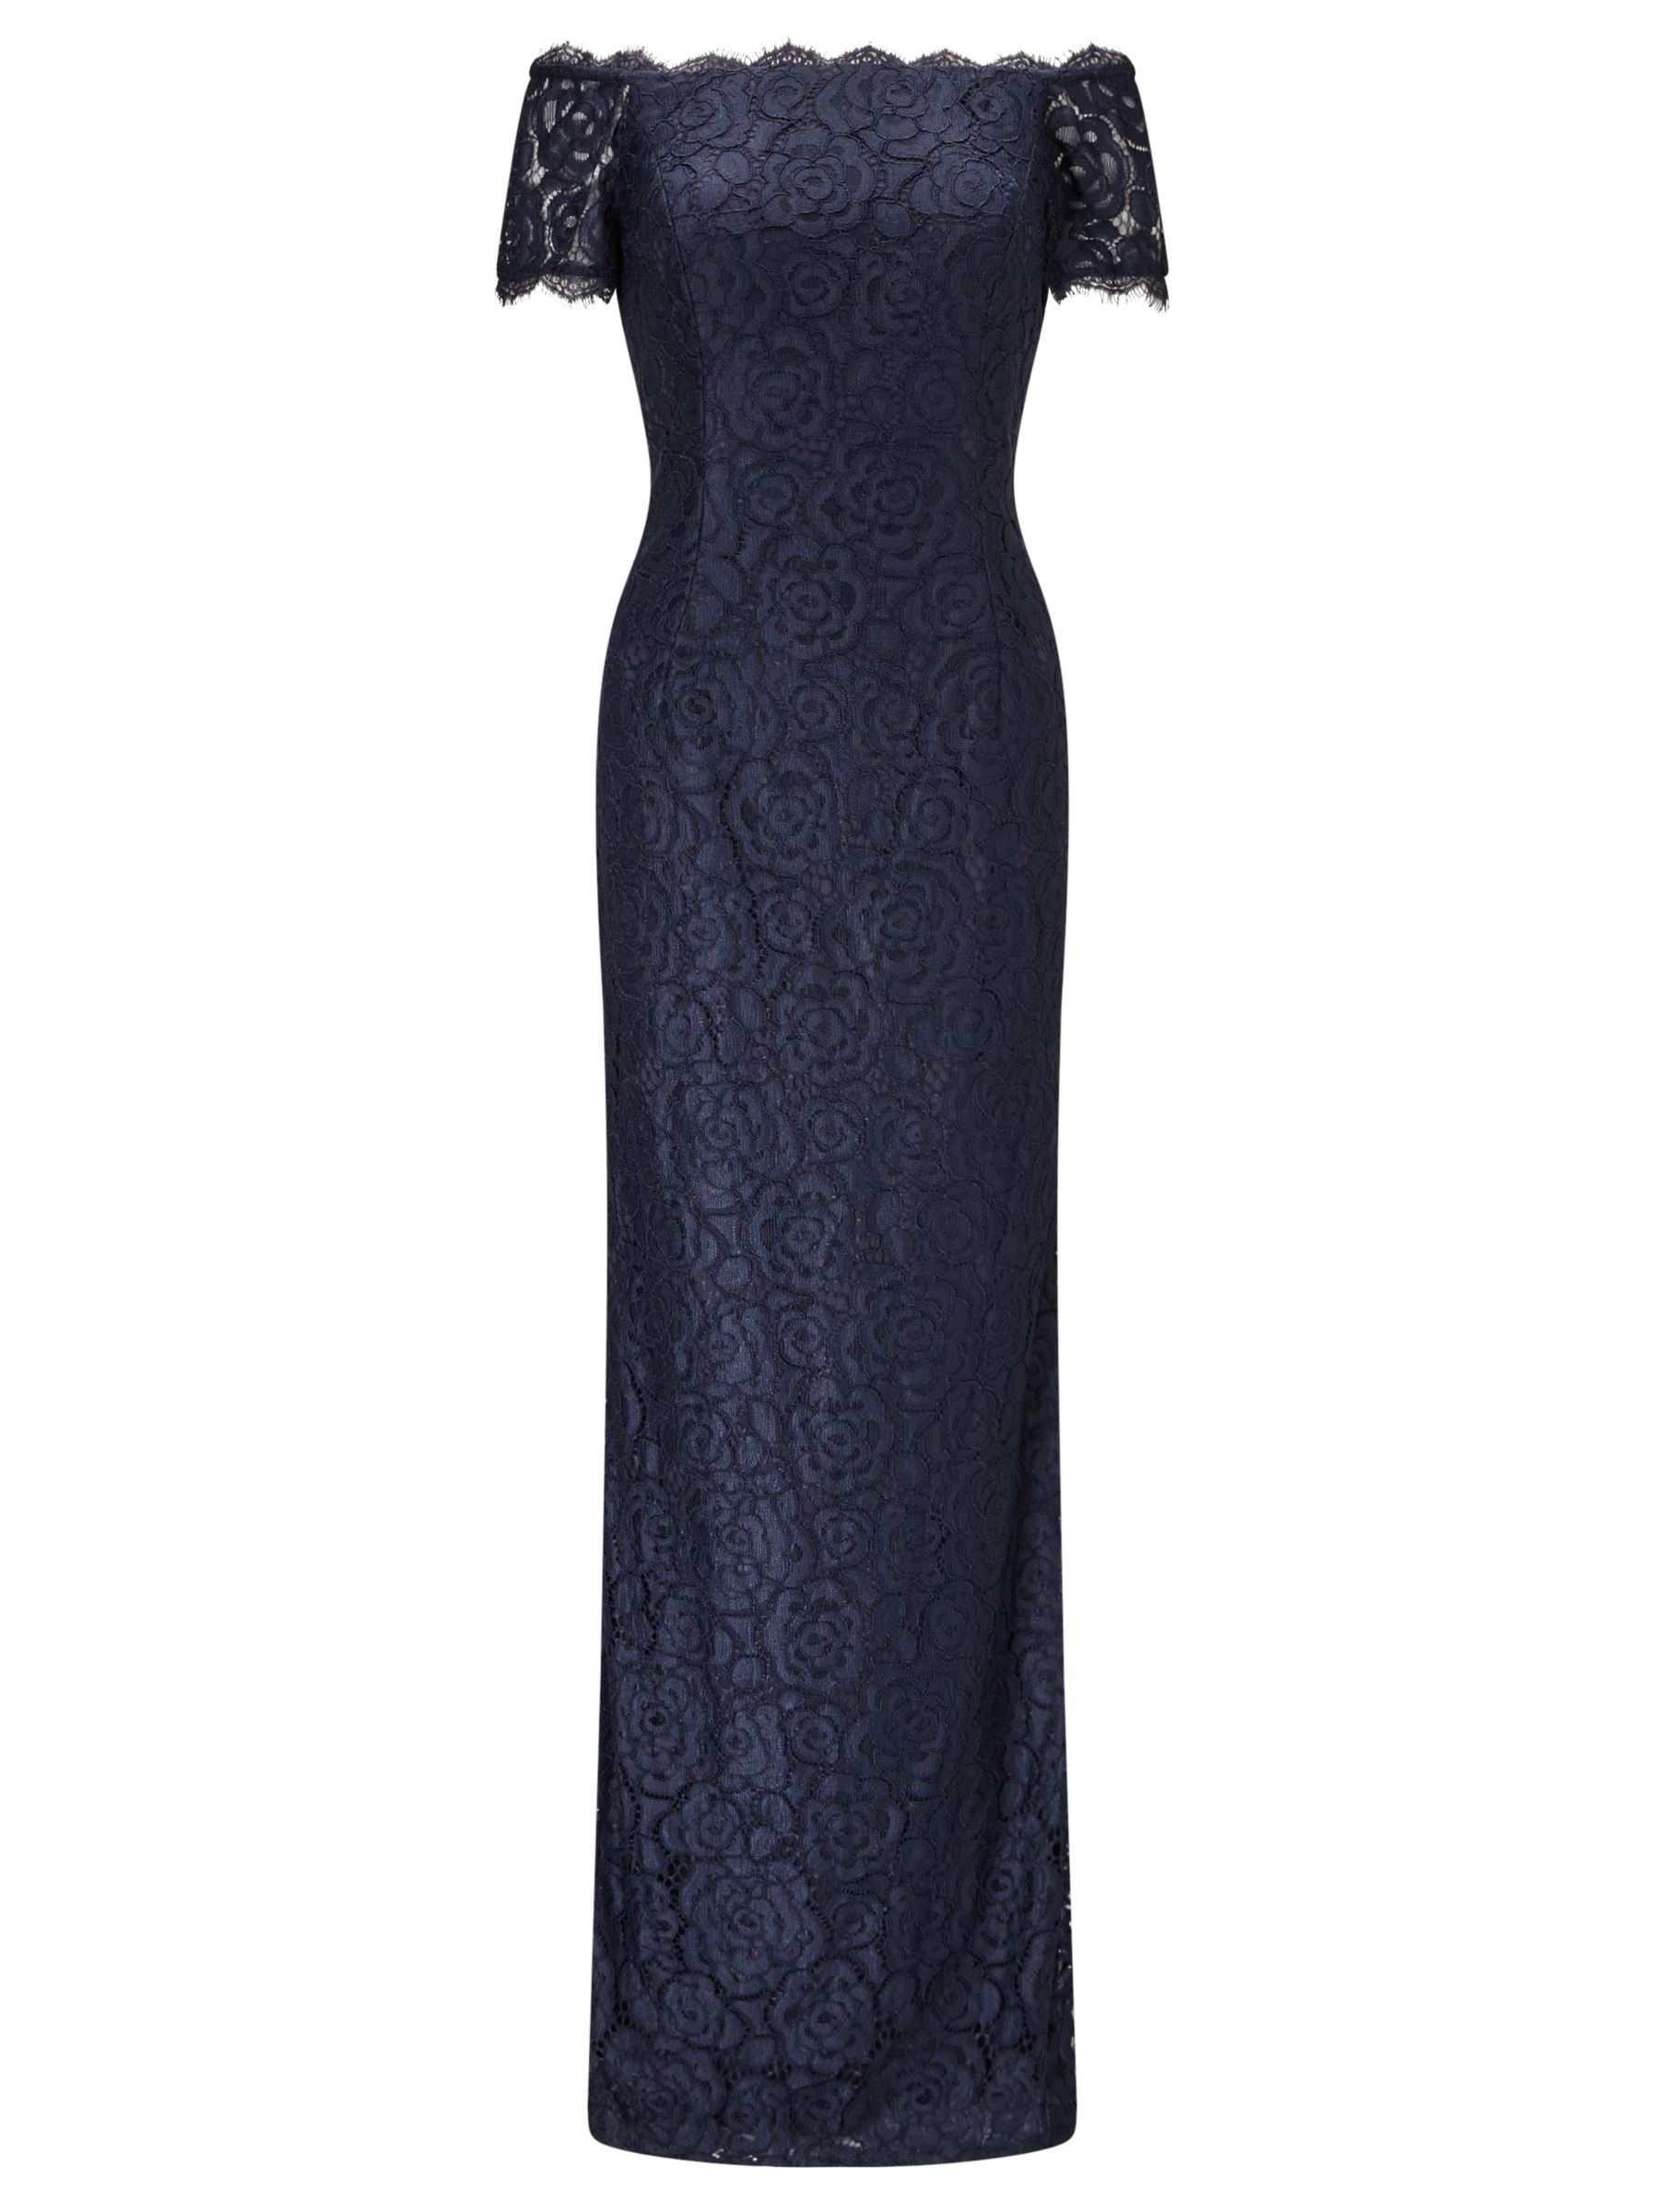 Adrianna Papell Off Shoulder Lace Gown, Midnight